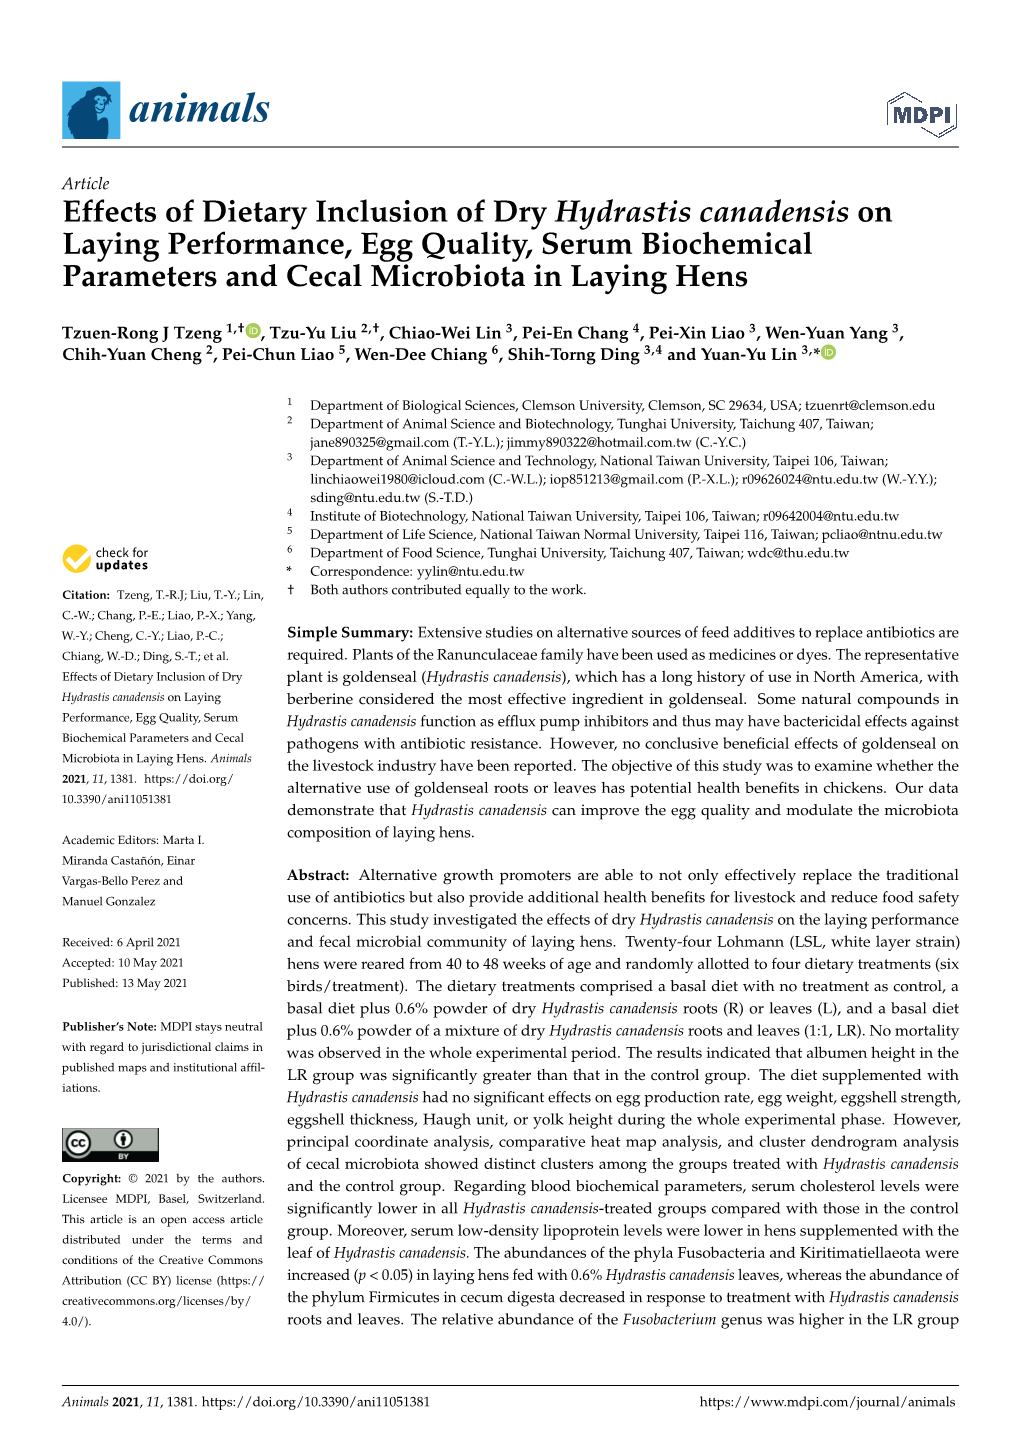 Effects of Dietary Inclusion of Dry Hydrastis Canadensis on Laying Performance, Egg Quality, Serum Biochemical Parameters and Cecal Microbiota in Laying Hens